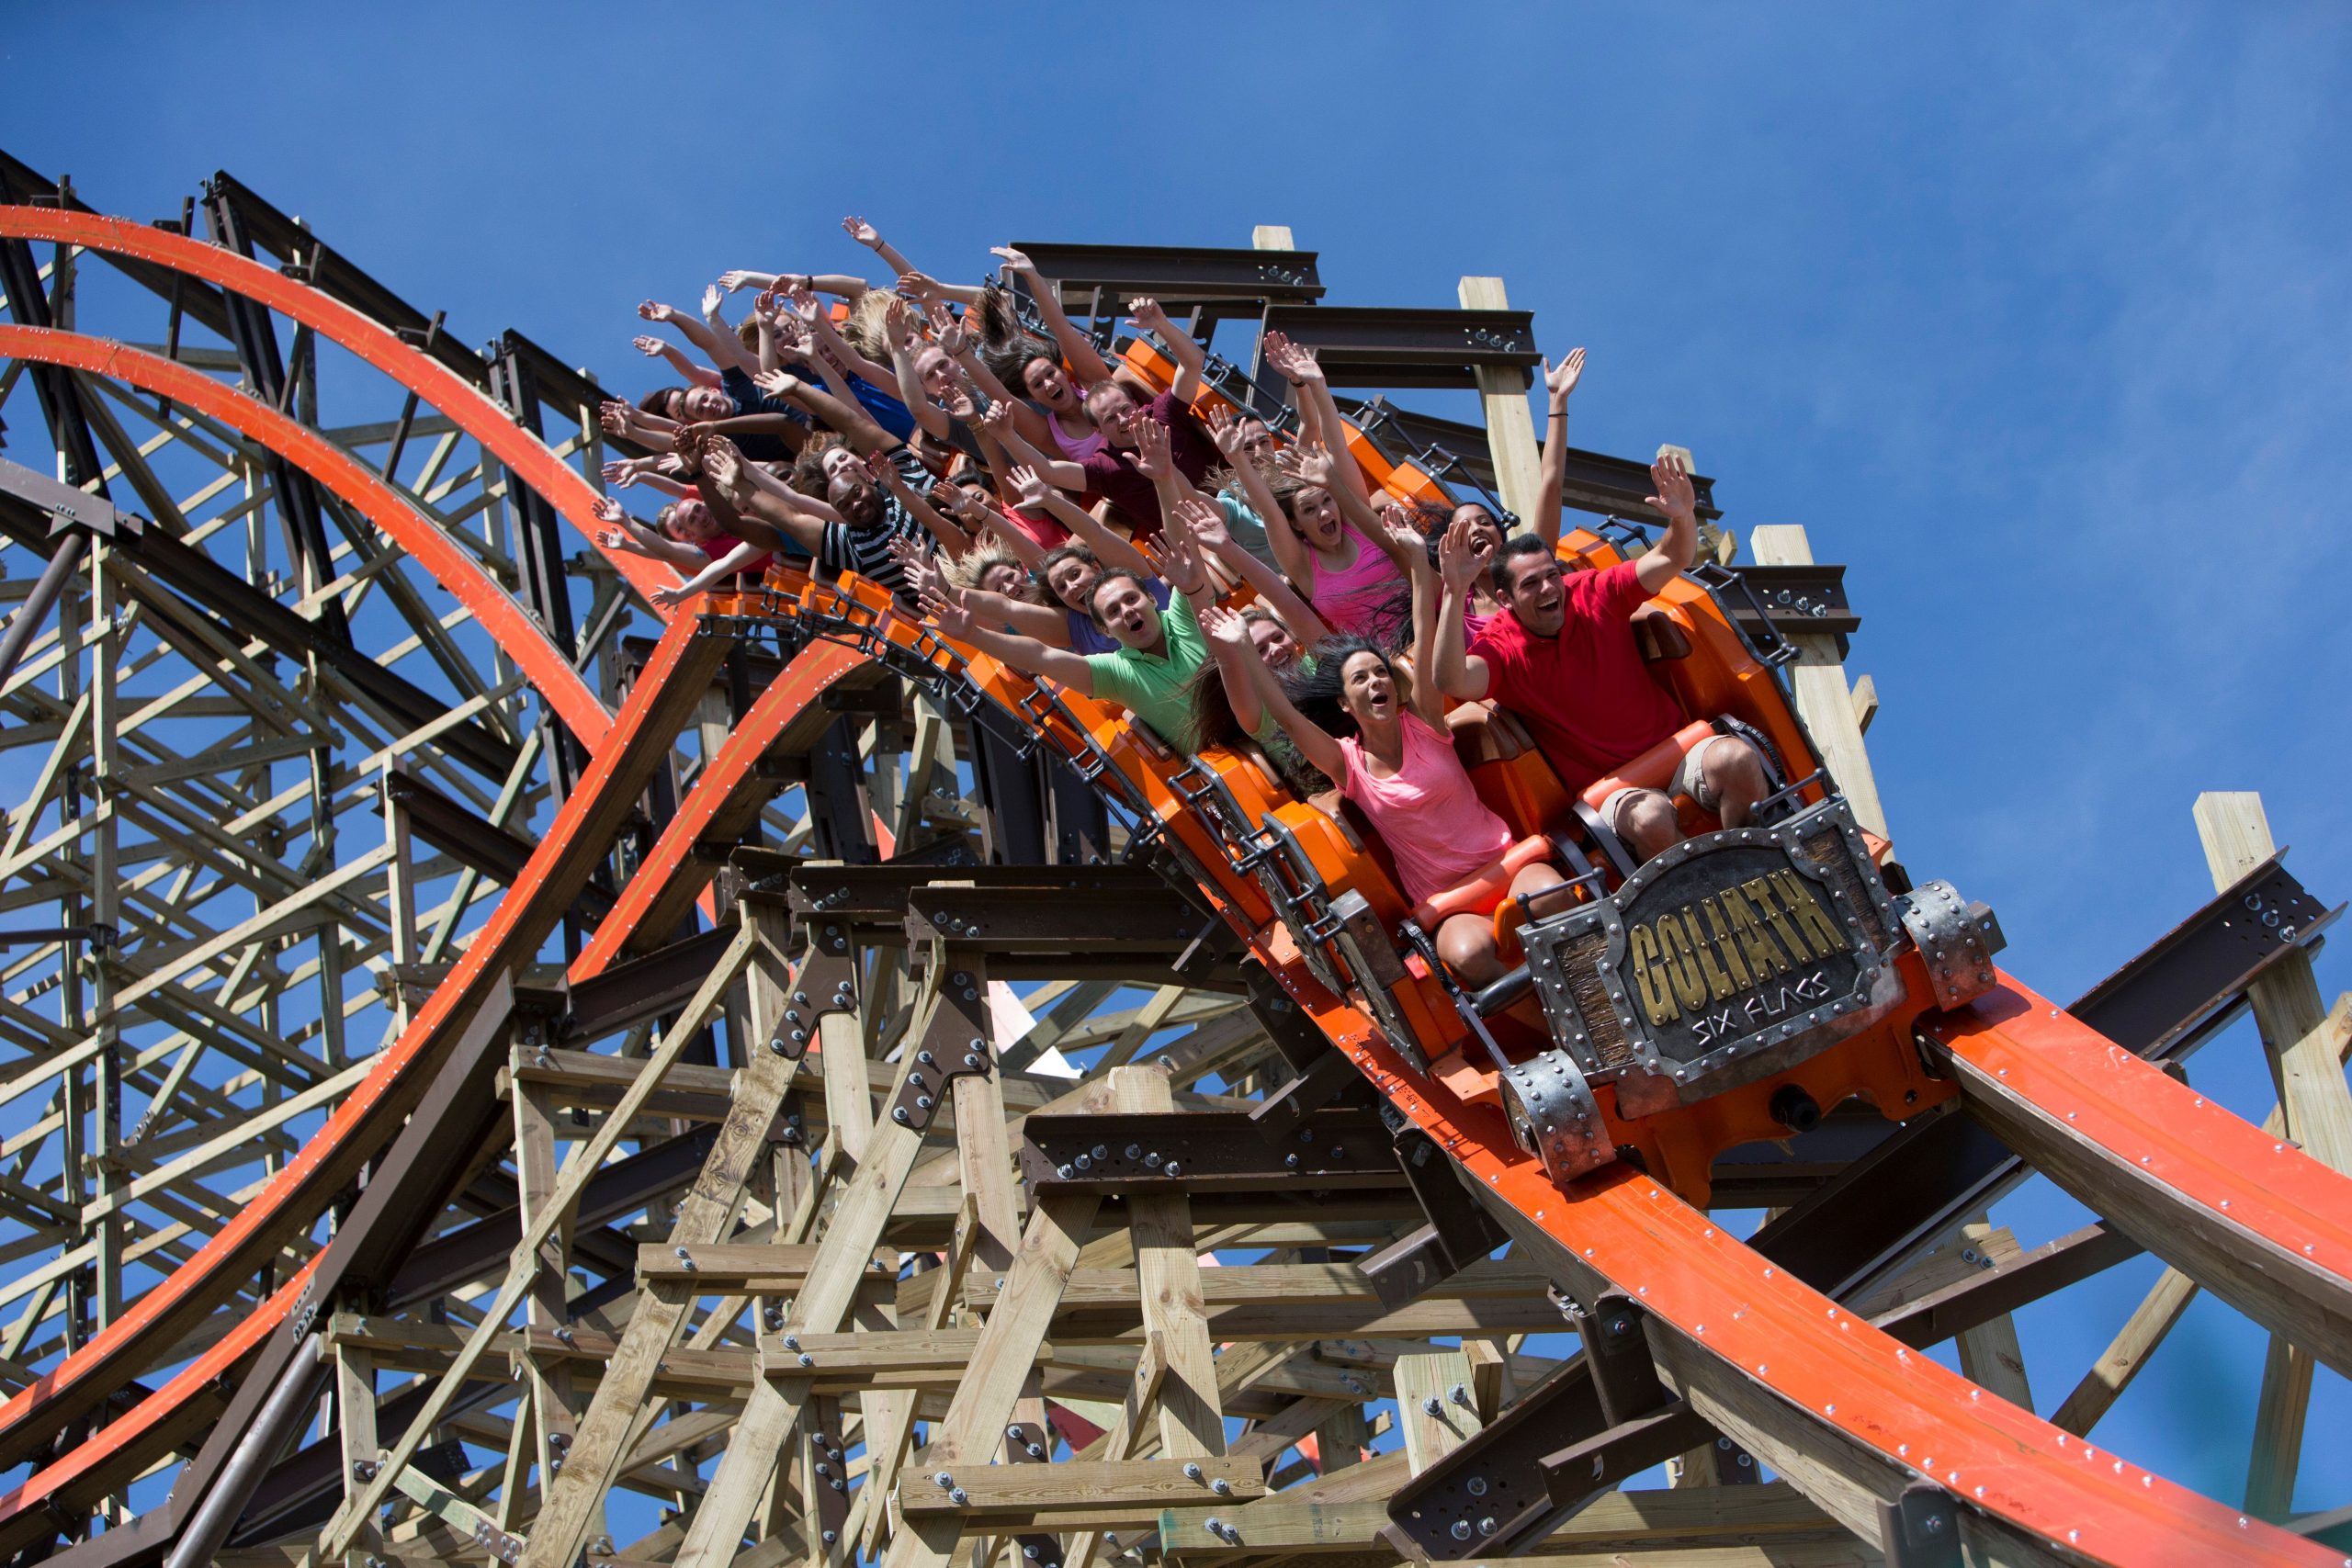 Groups will be thrilled by all the roller coasters and shows at Six Flags Great America in Gurnee.